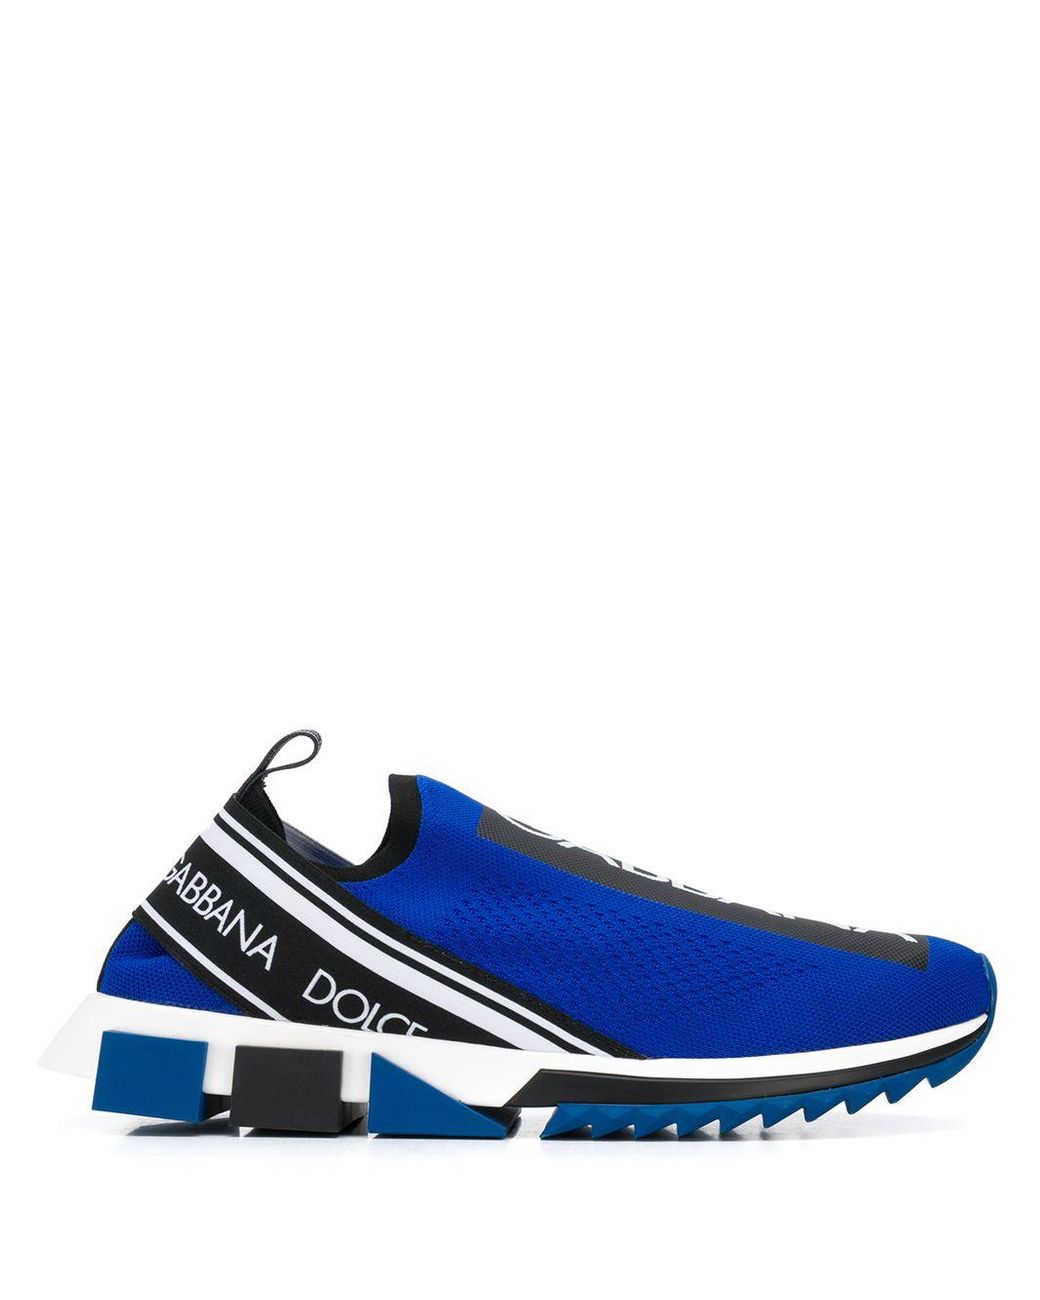 Dolce & Gabbana Synthetic Stretch Mesh Sorrento Sneakers With Logo in